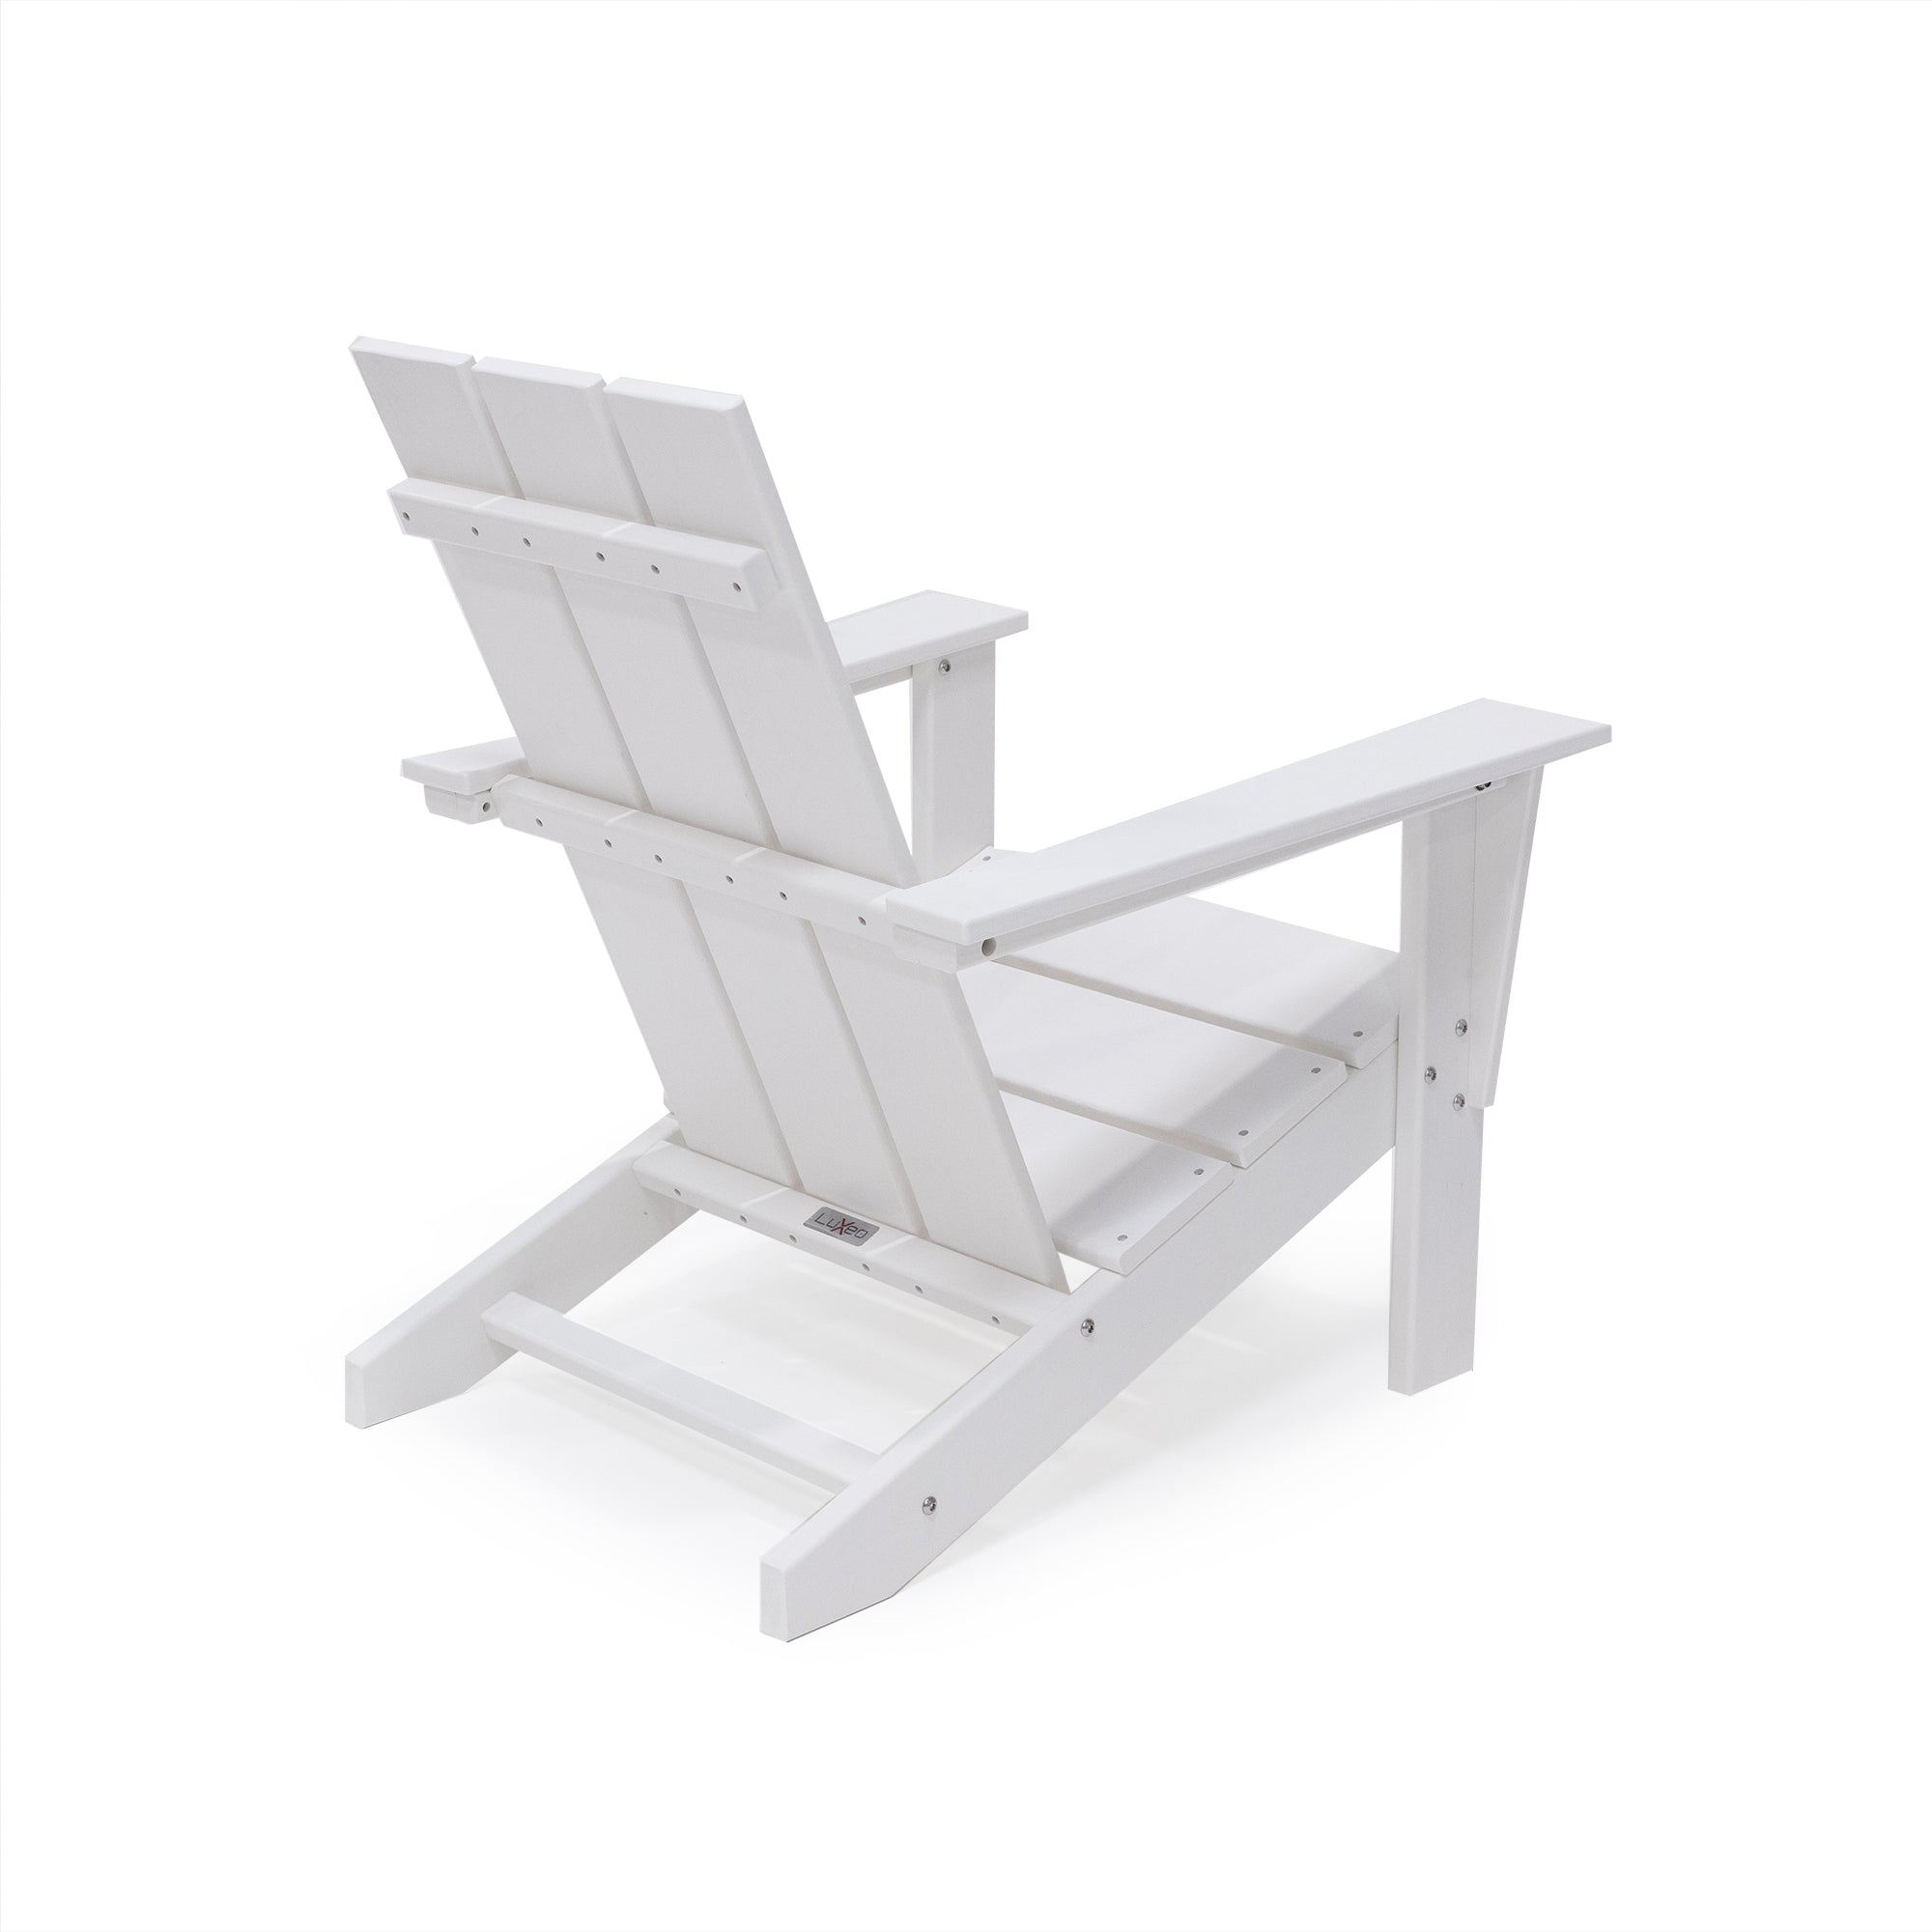 Arcadia Outdoor Patio Adirondack Chair and Table Set (3-Piece)